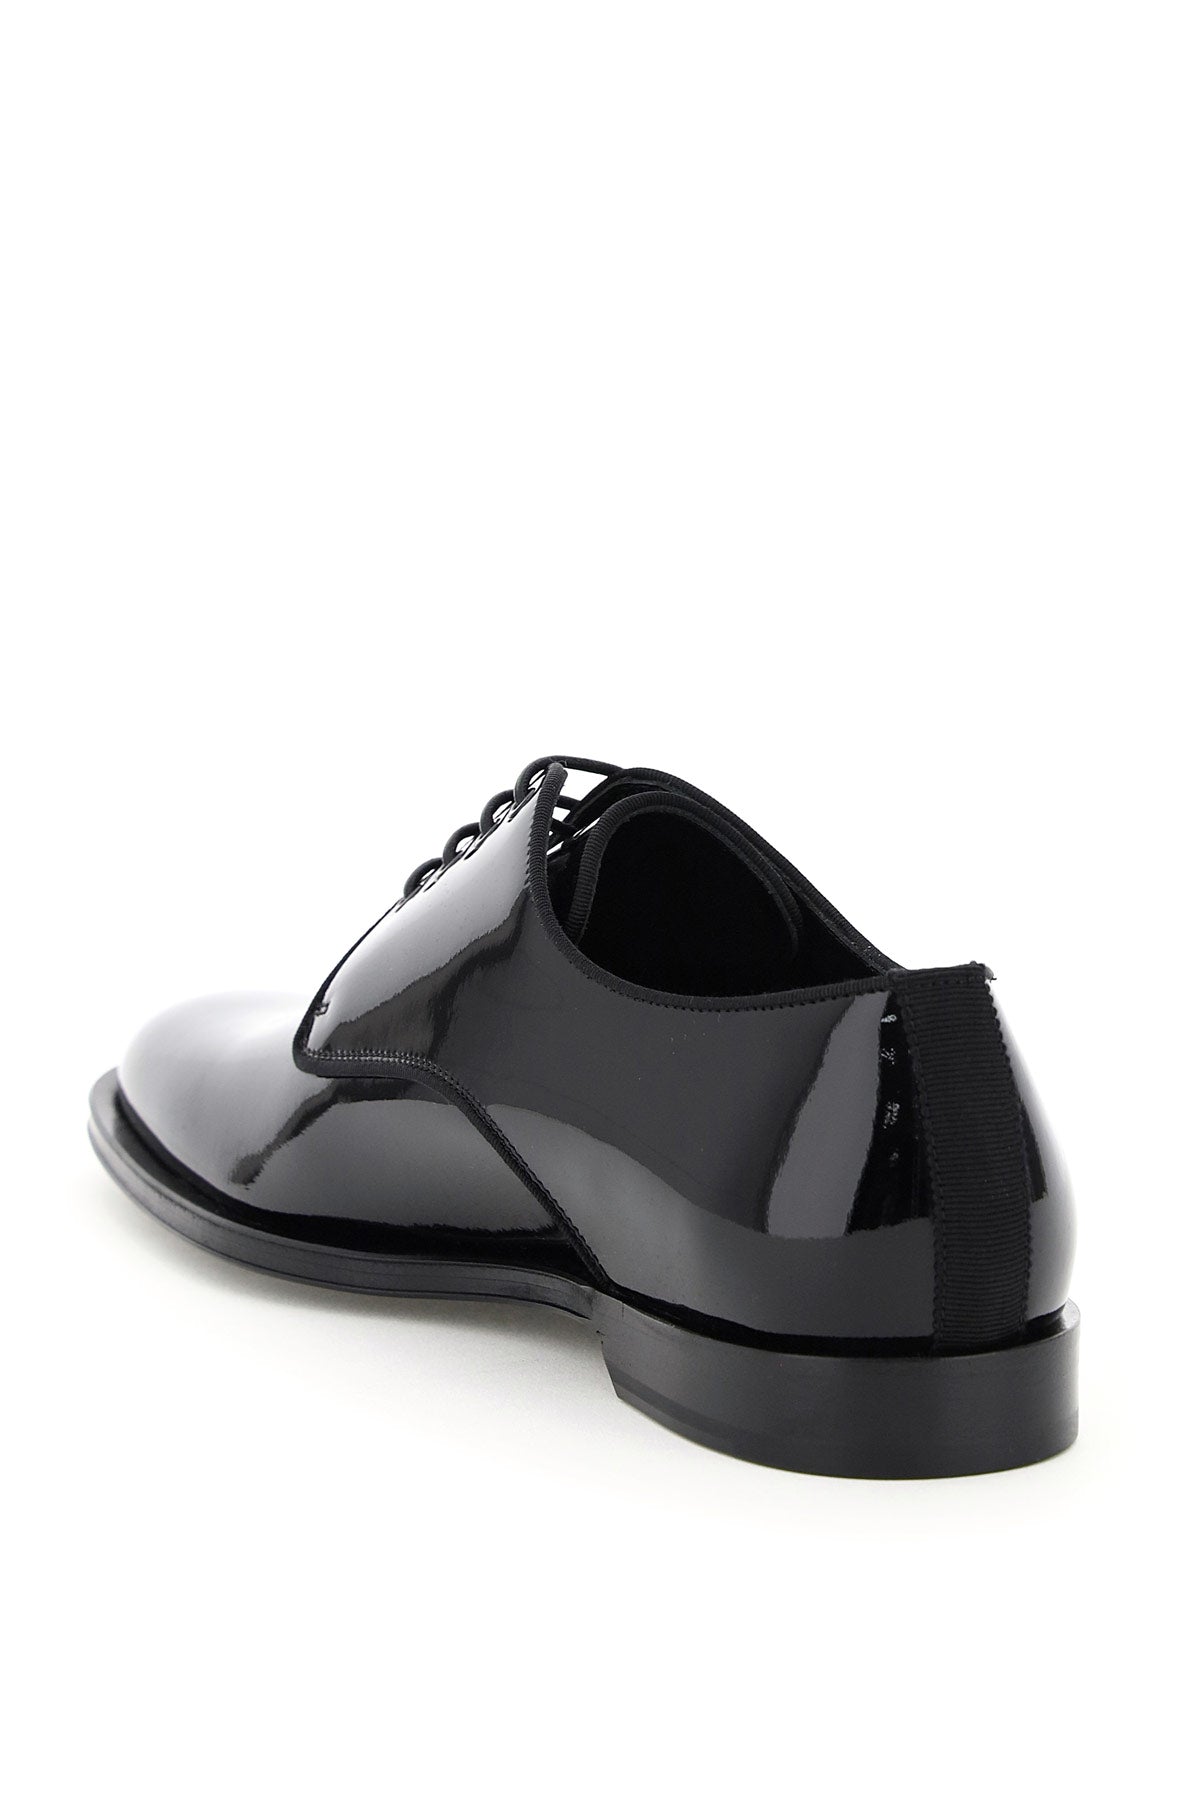 Dolce & Gabbana Dolce & gabbana patent leather lace-up shoes